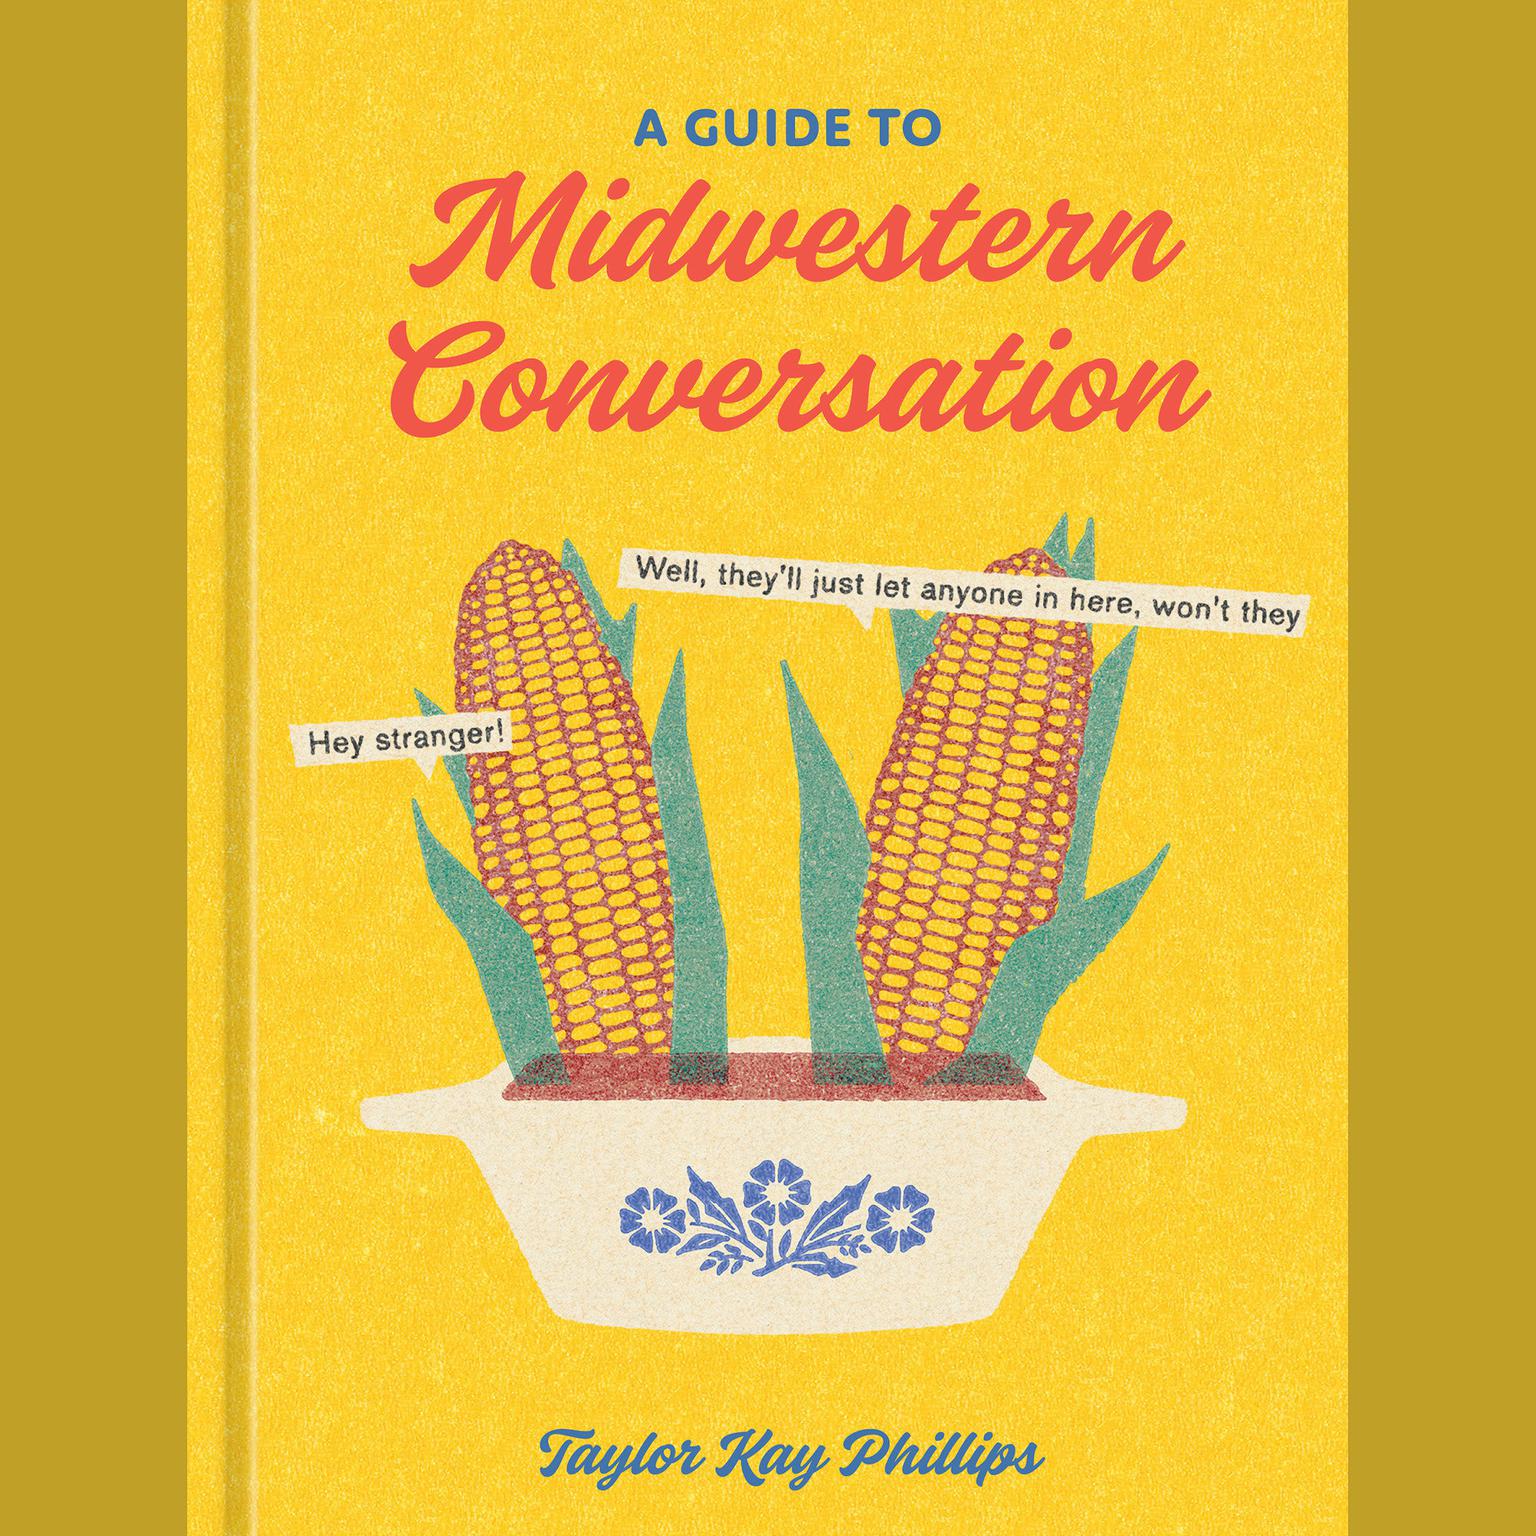 A Guide to Midwestern Conversation Audiobook, by Taylor Kay Phillips